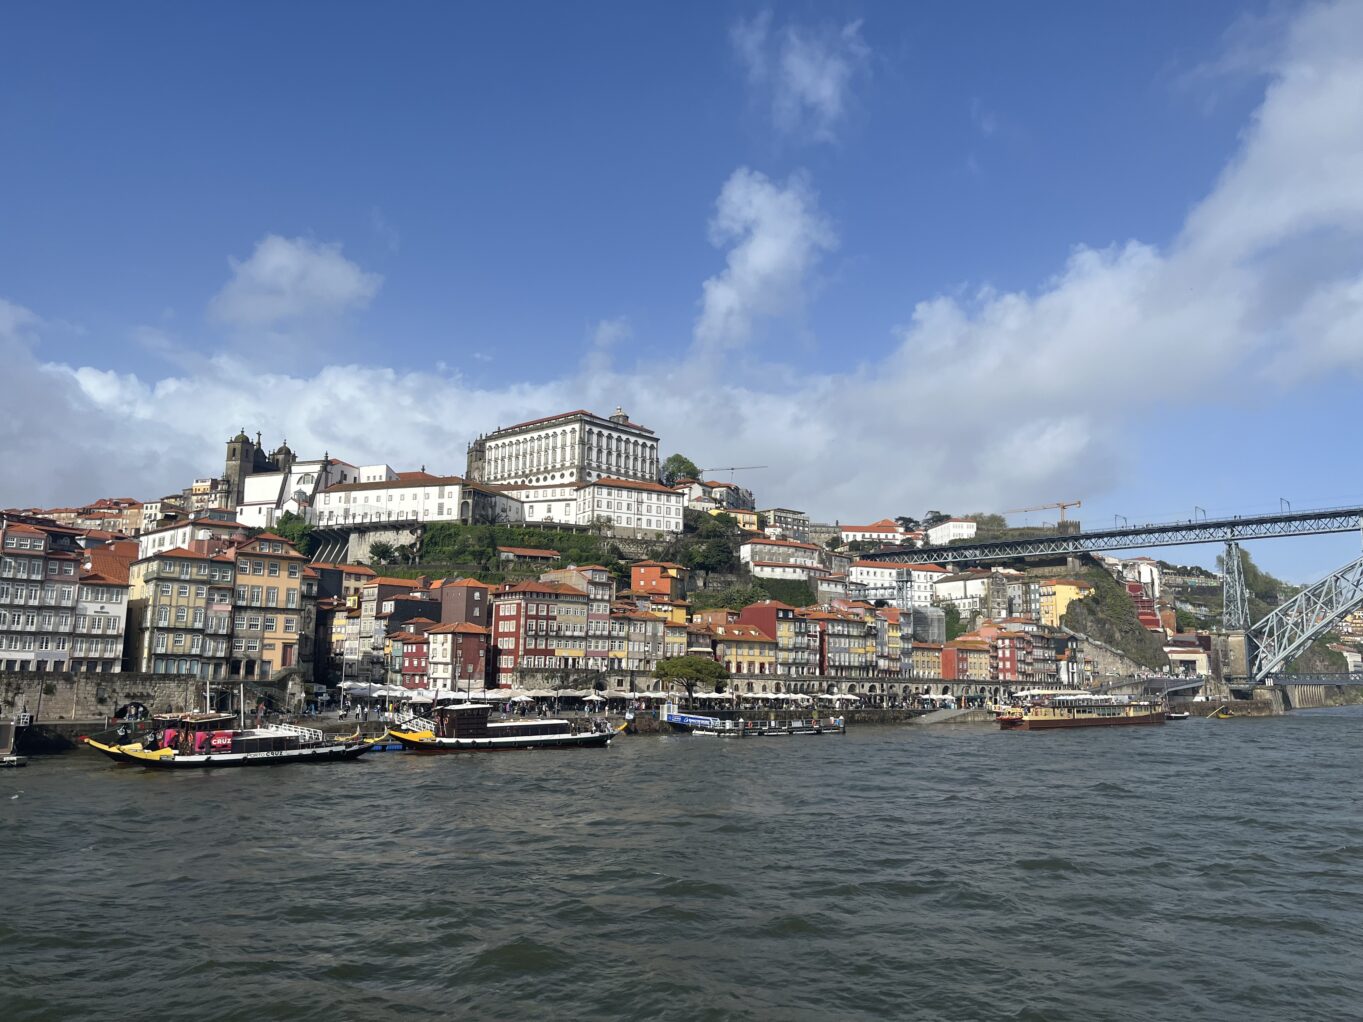 The city Porto with buildings and bridges